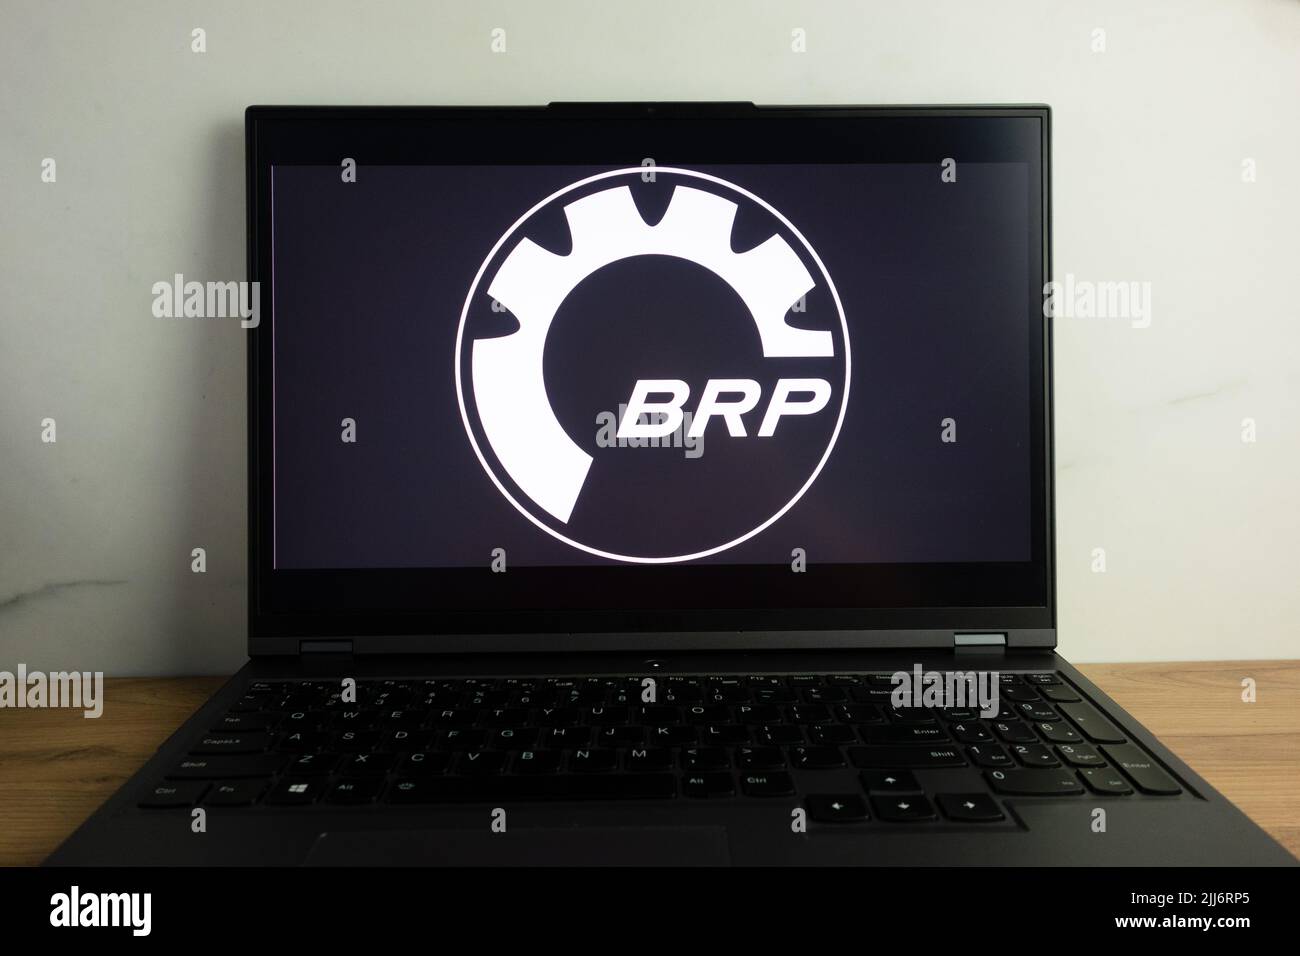 KONSKIE, POLAND - July 22, 2022: Bombardier Recreational Products Inc (BRP) Canadian snowmobiles manufacturer logo displayed on laptop computer screen Stock Photo